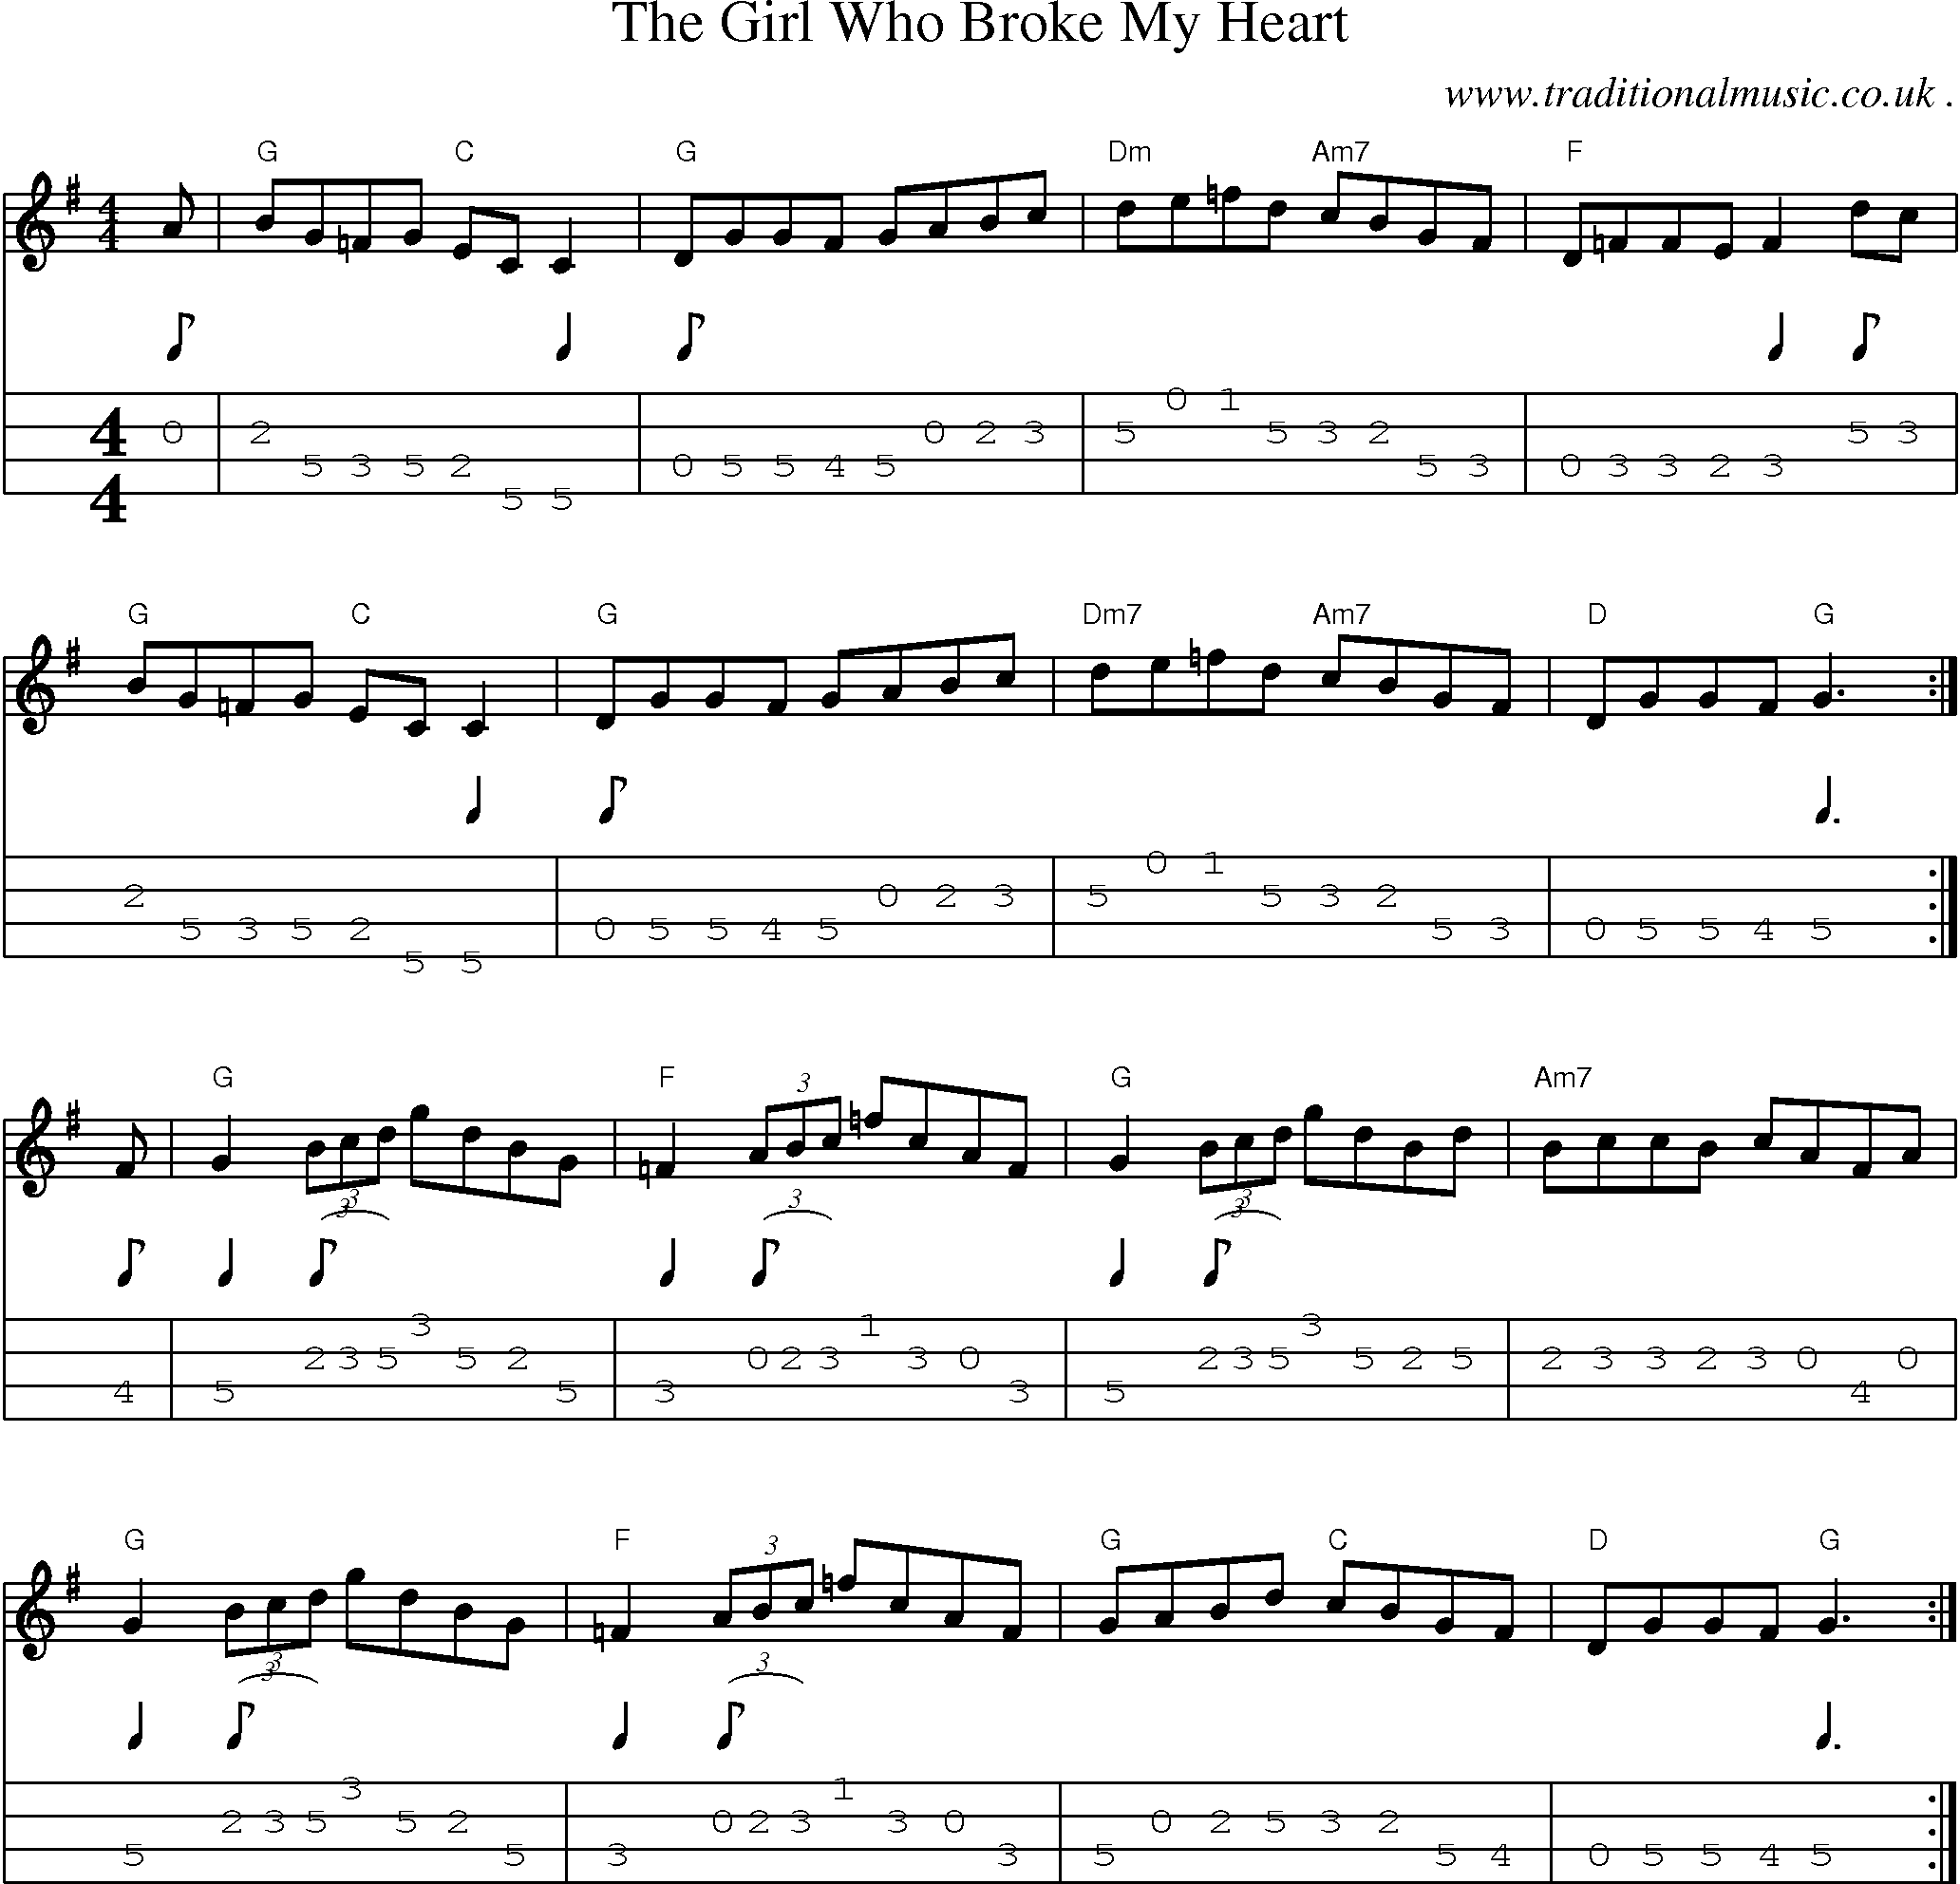 Music Score and Mandolin Tabs for The Girl Who Broke My Heart